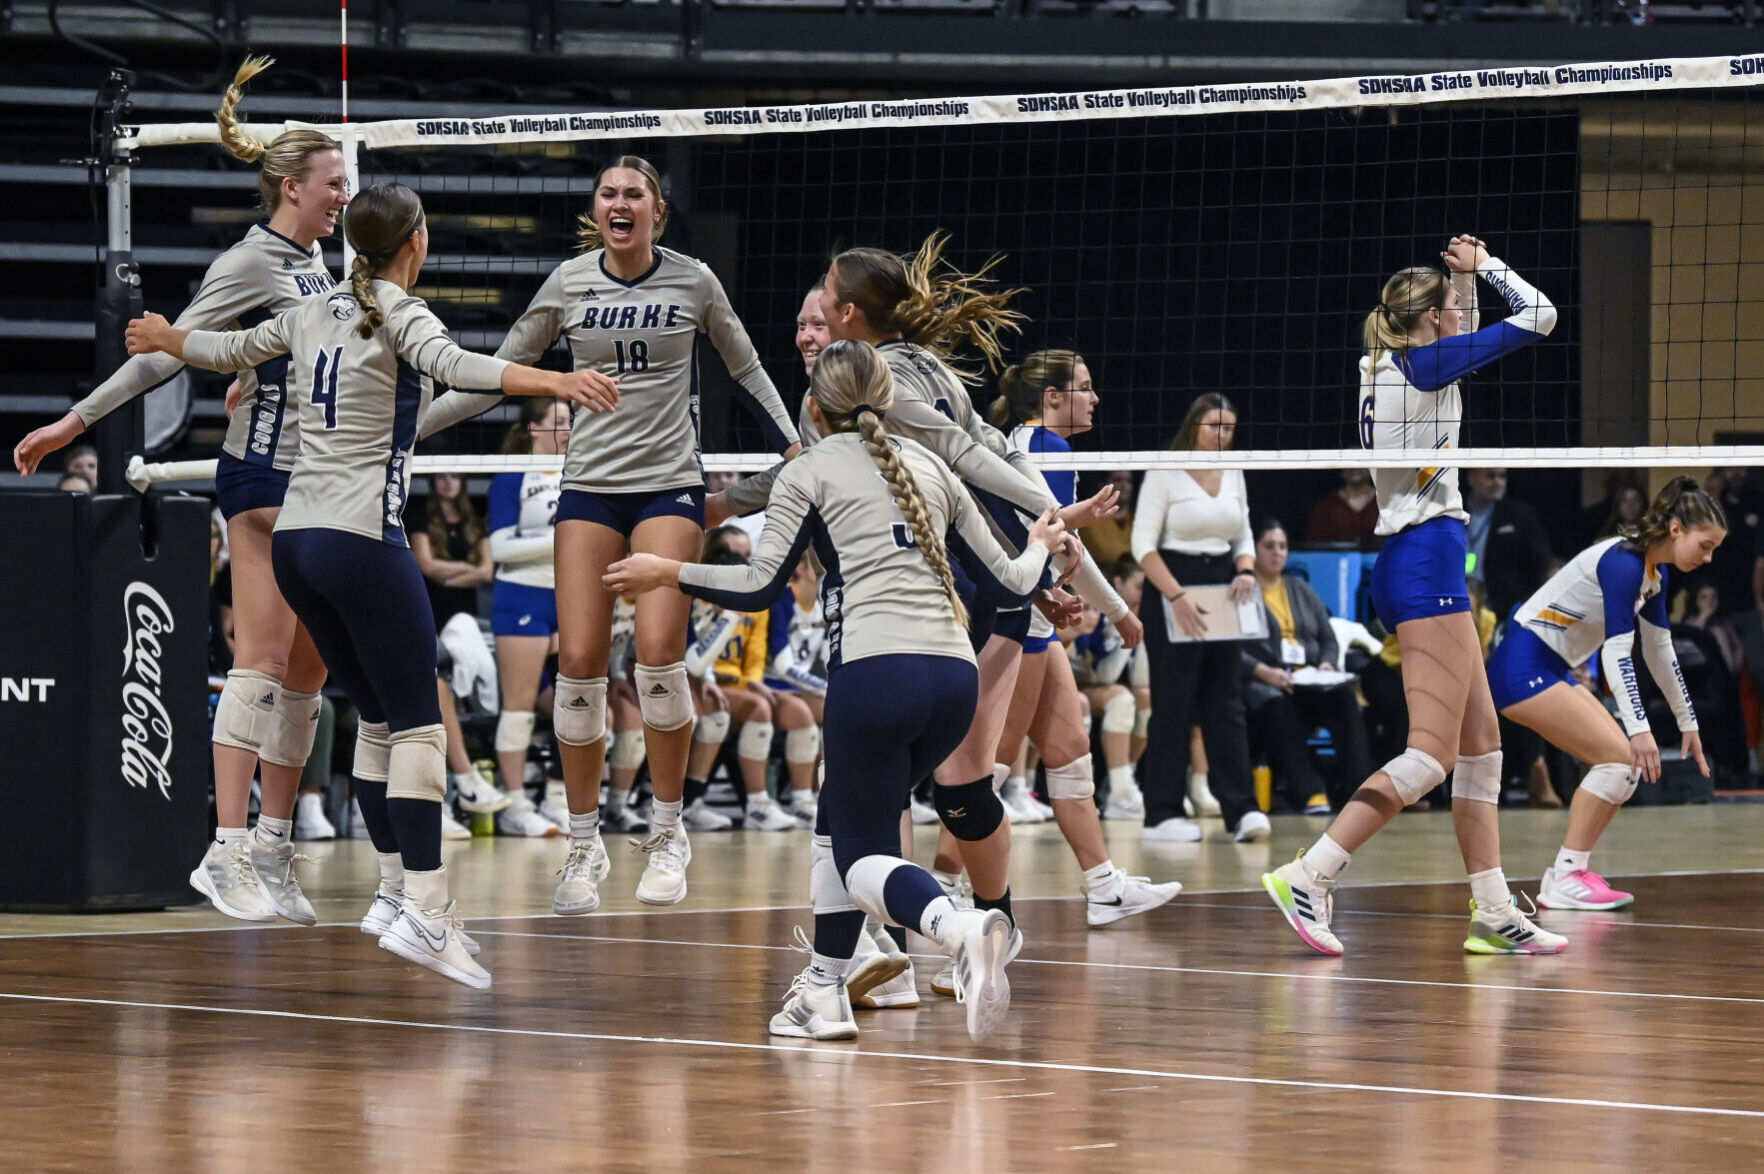 Burke Volleyball Team Clinches Third Place at Class B State Tournament with a Thrilling Win